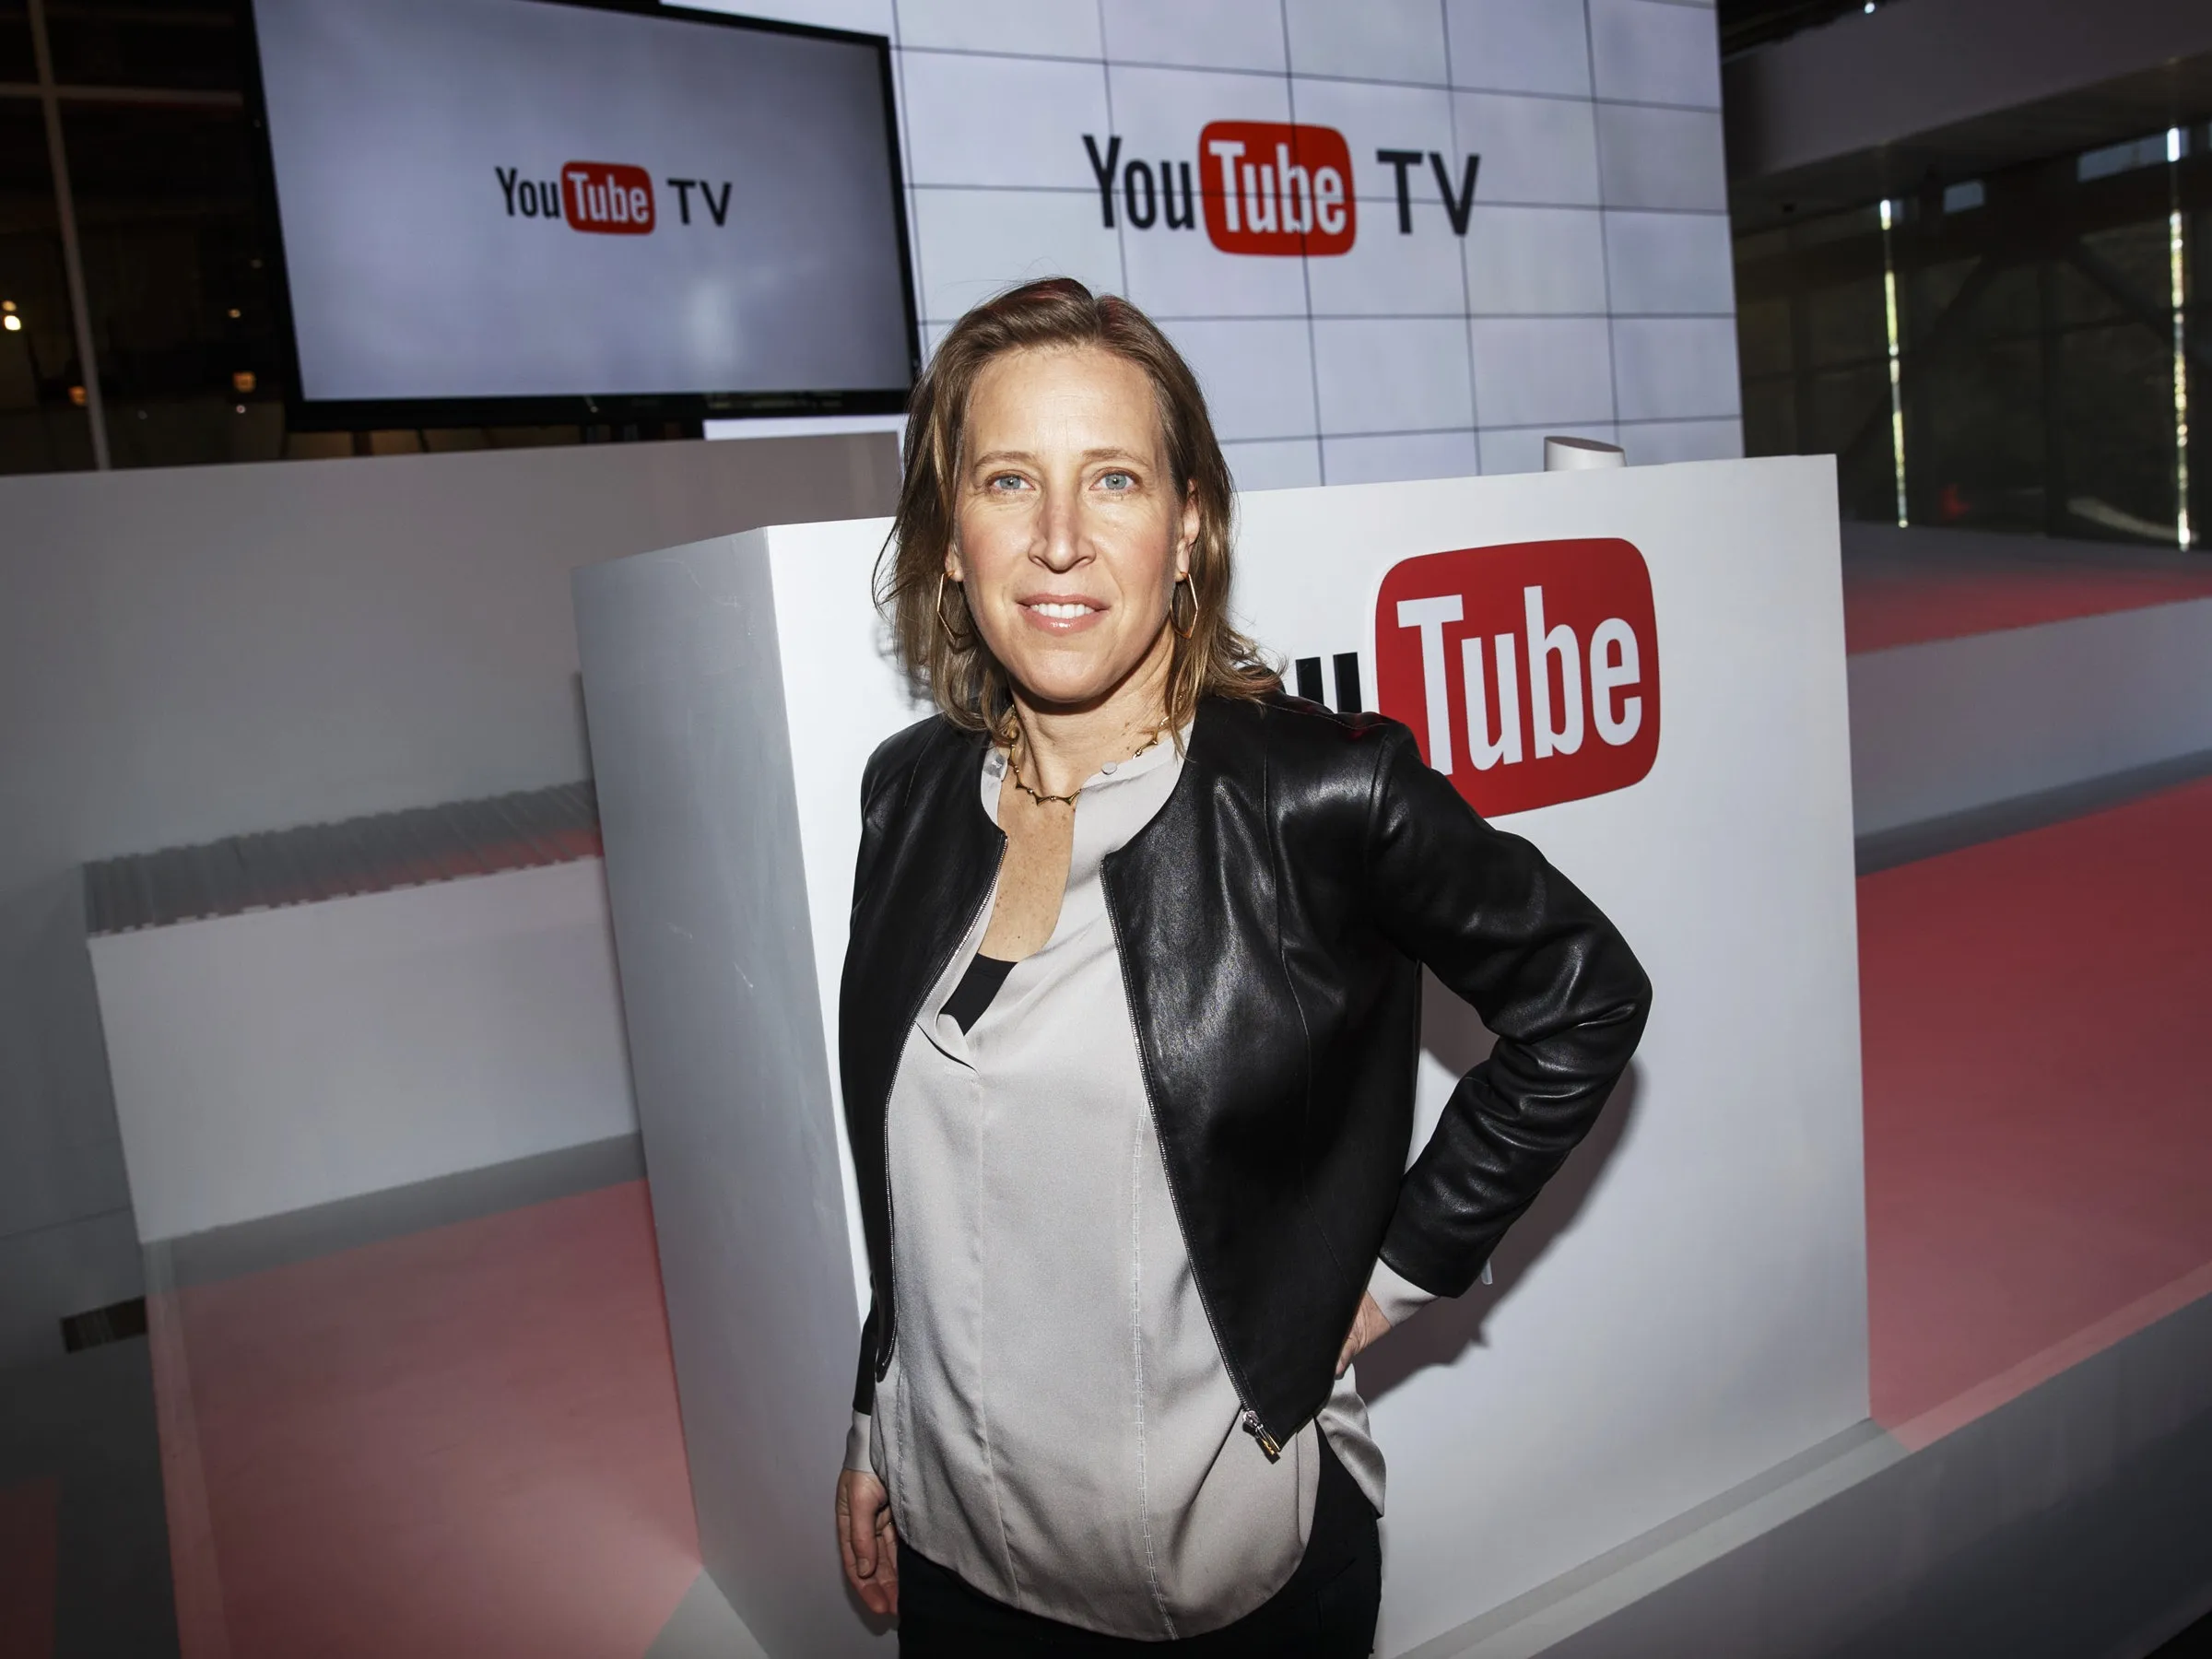 YouTube has paid over $30 billion to creators, artists, and others over the past three years